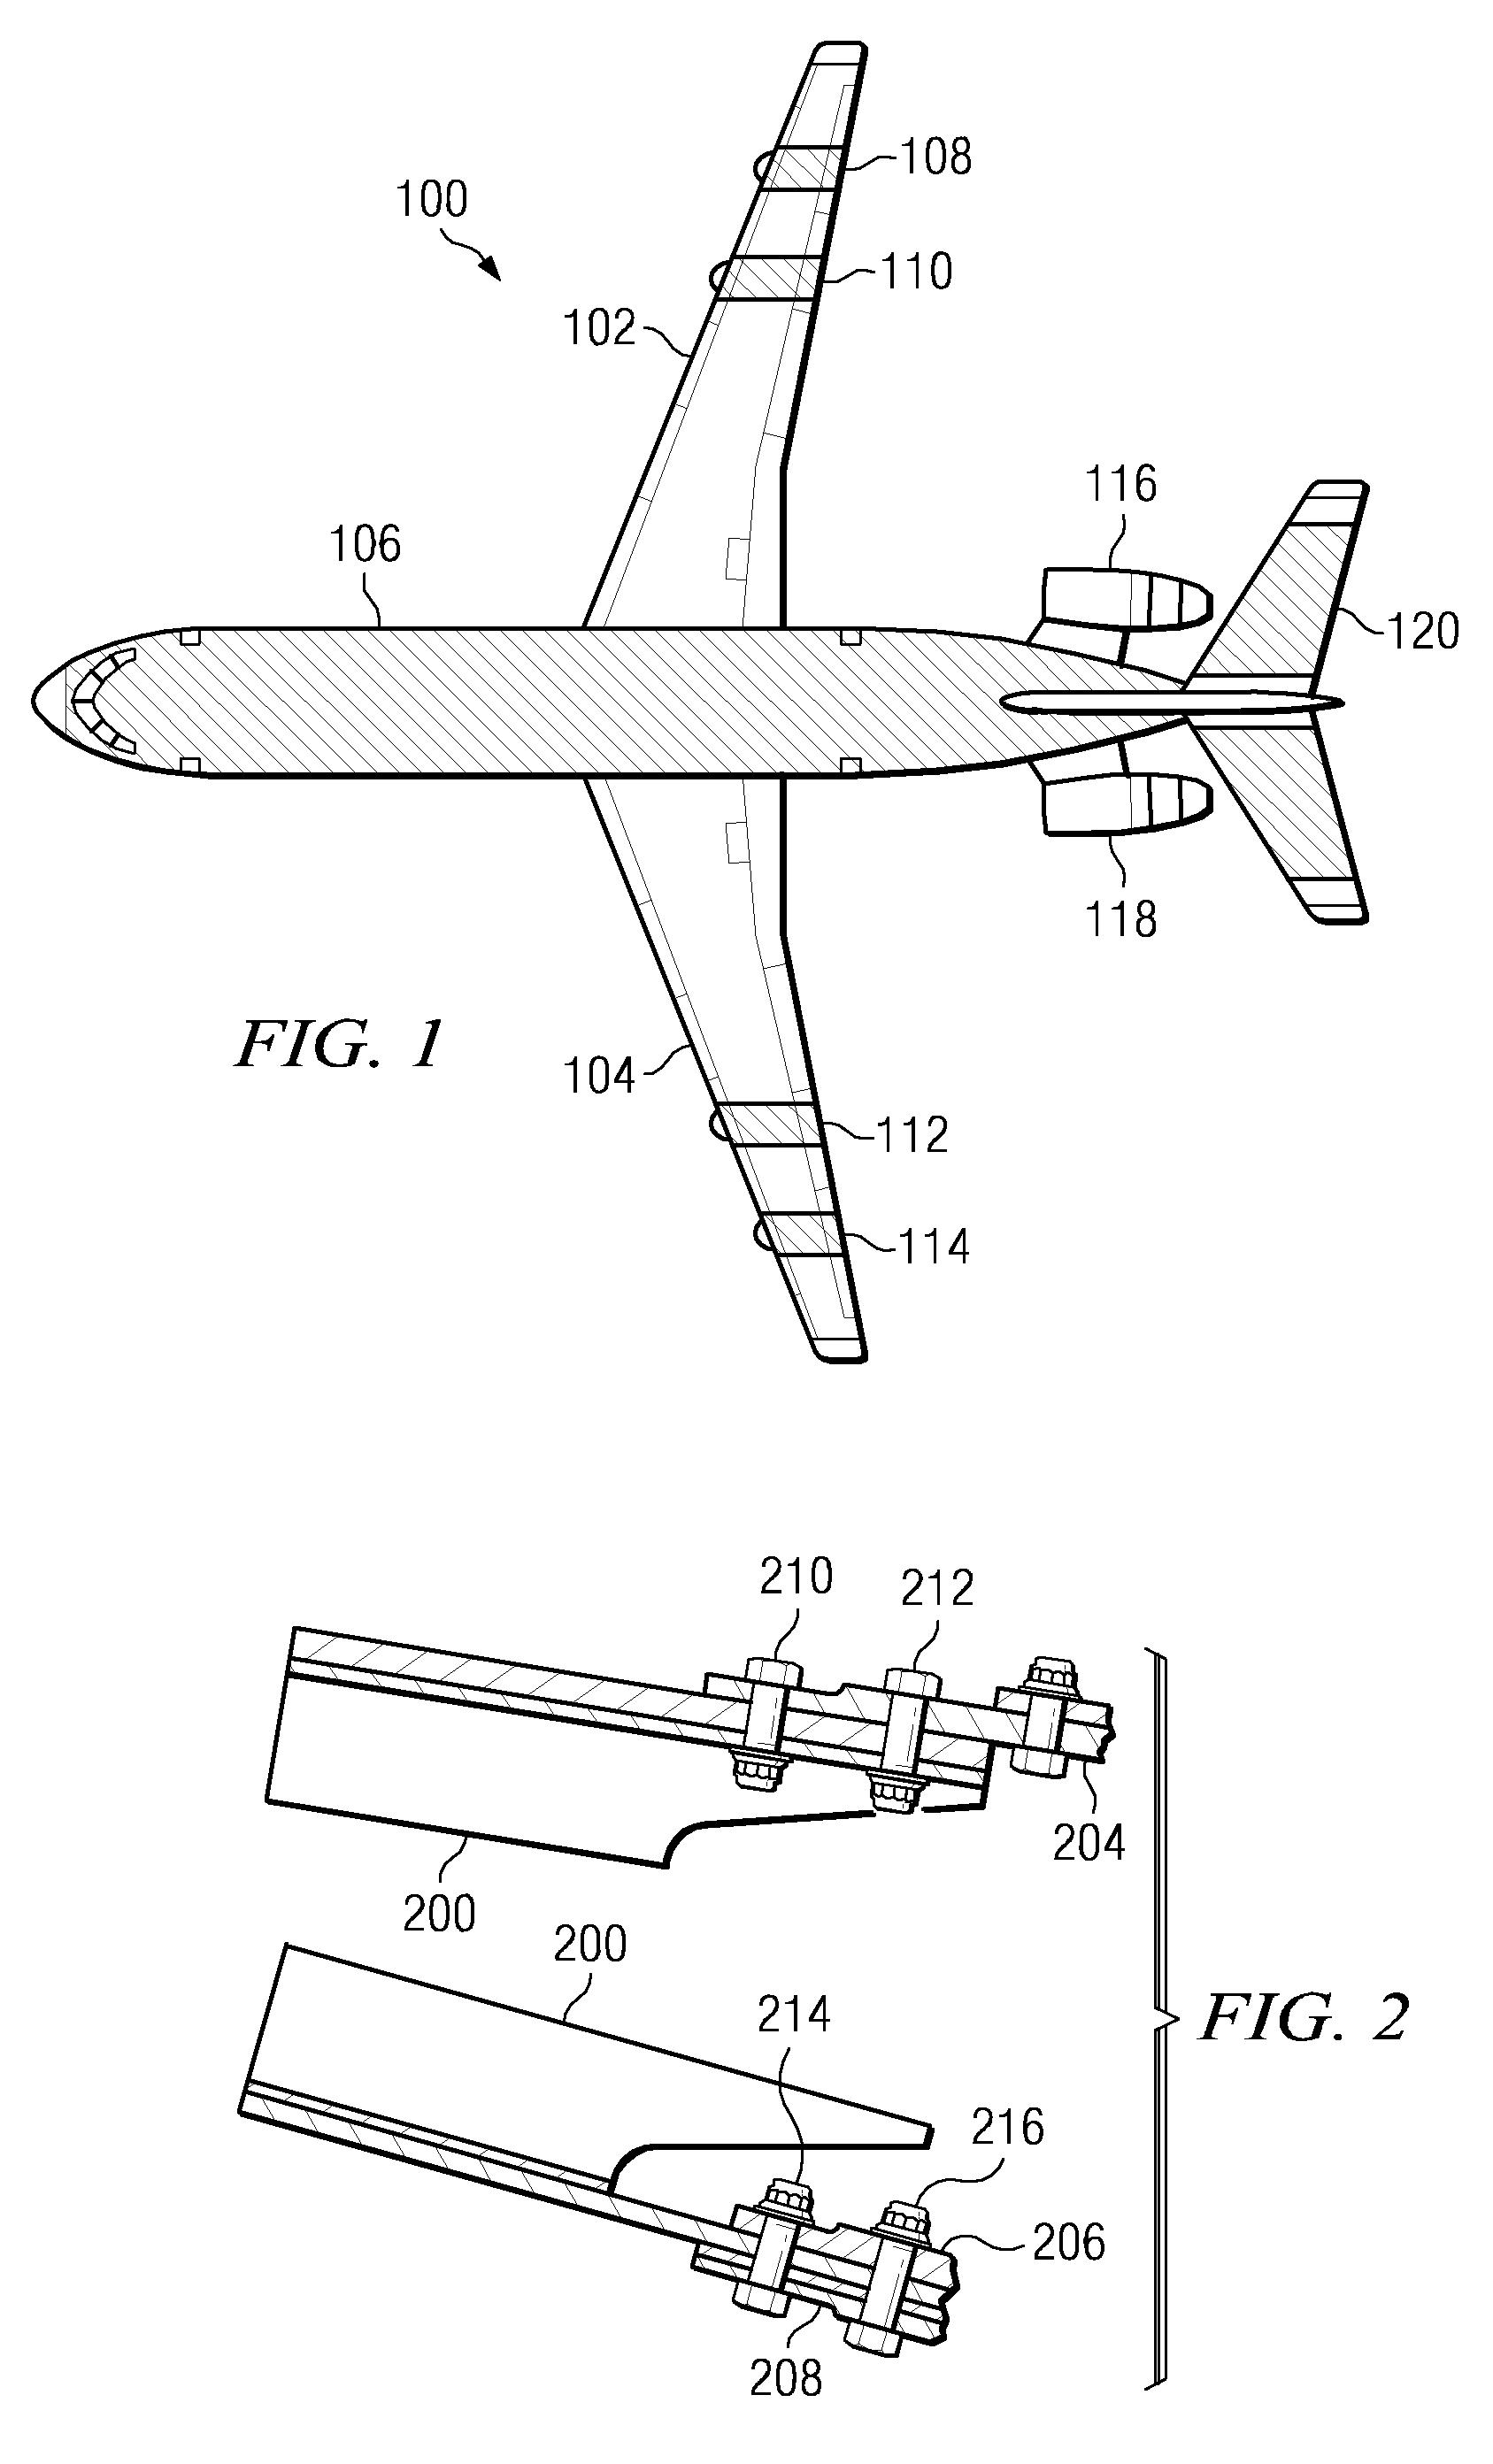 Method and apparatus for preventing lightning strike damage to a structural component